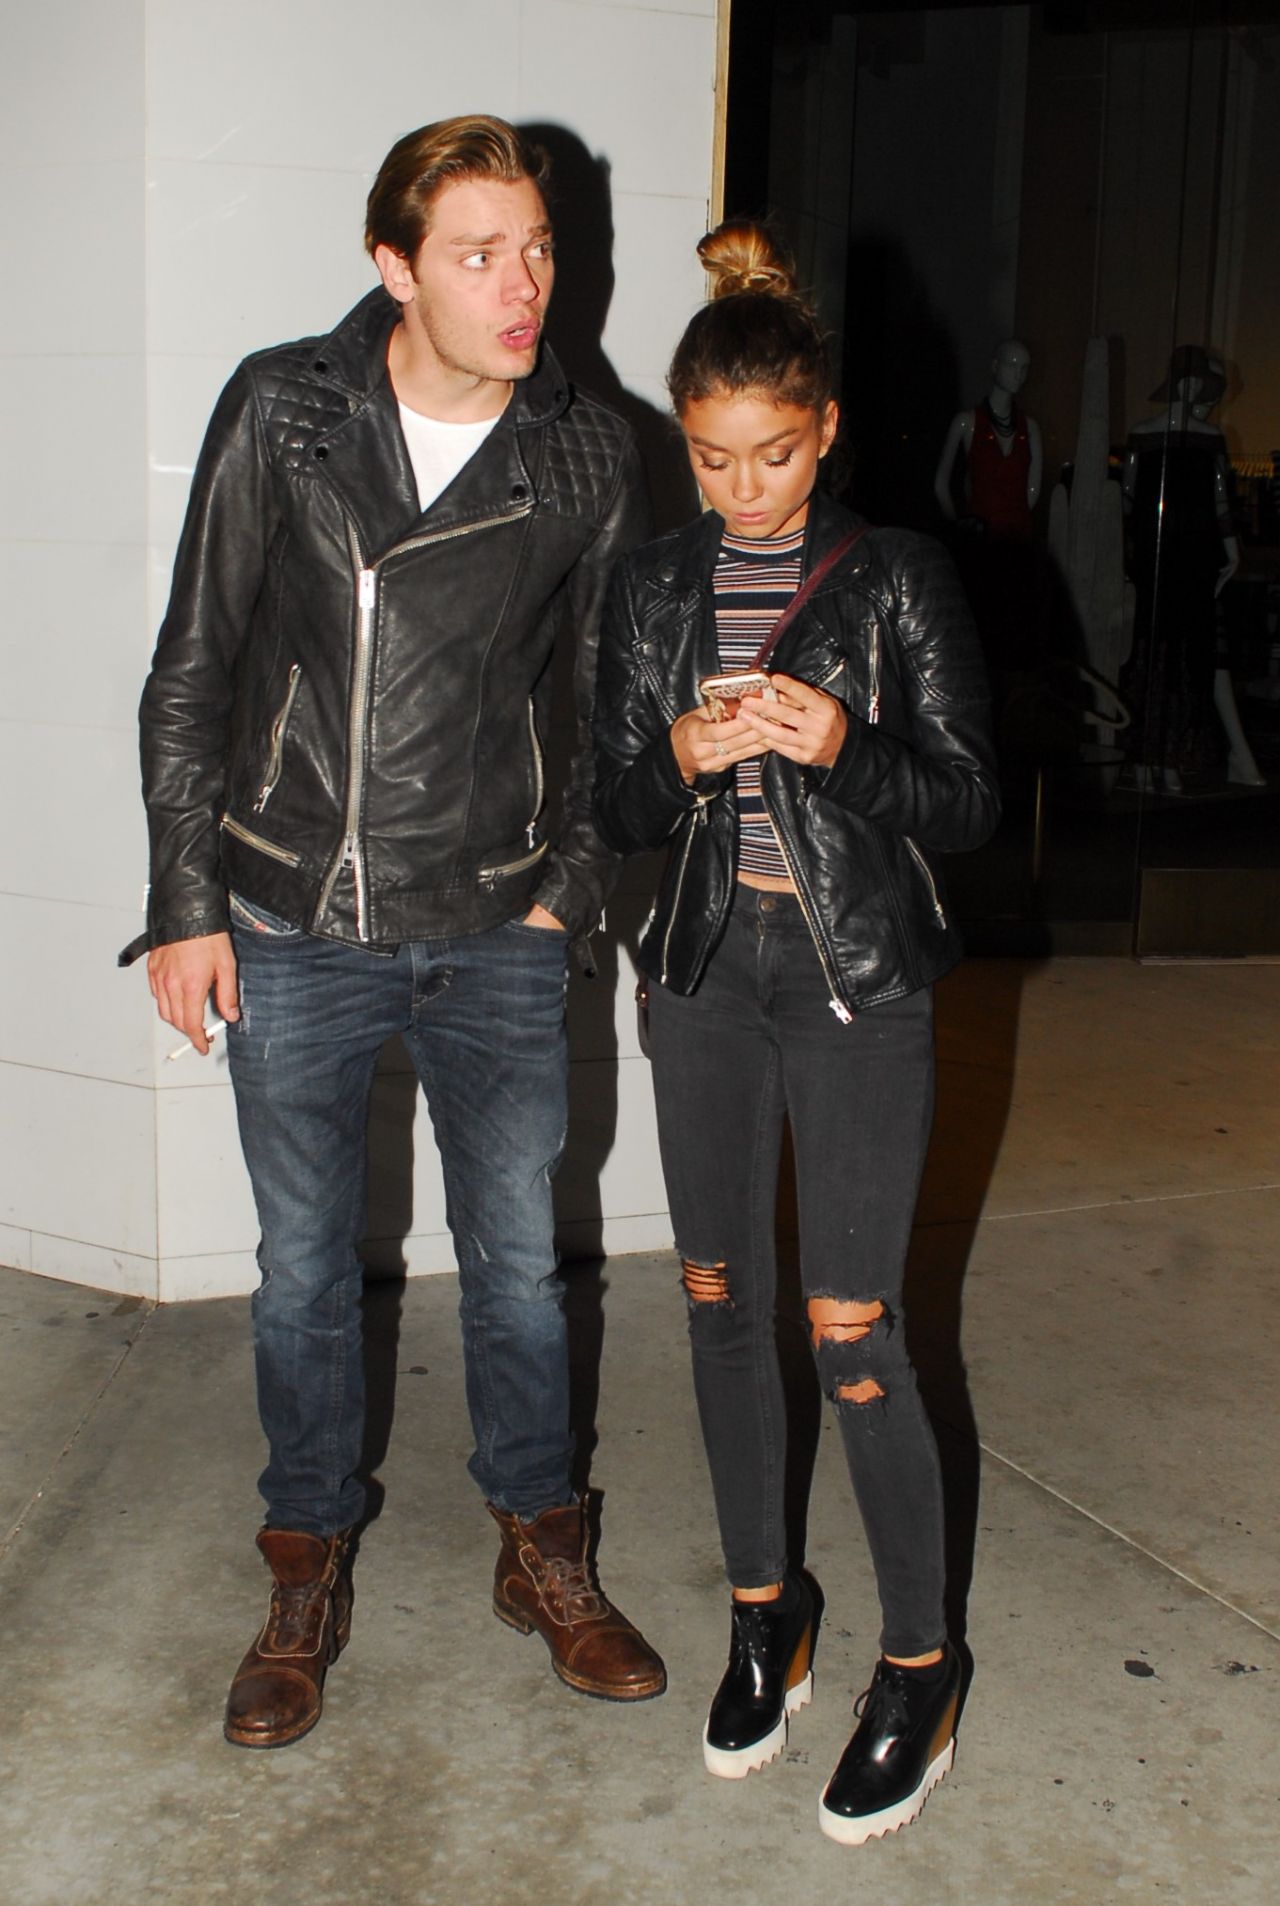 Sarah Hyland and Dominic Sherwood - Wait for Their Uber After Leaving a  West Hollywod Bar, February 2016 • CelebMafia